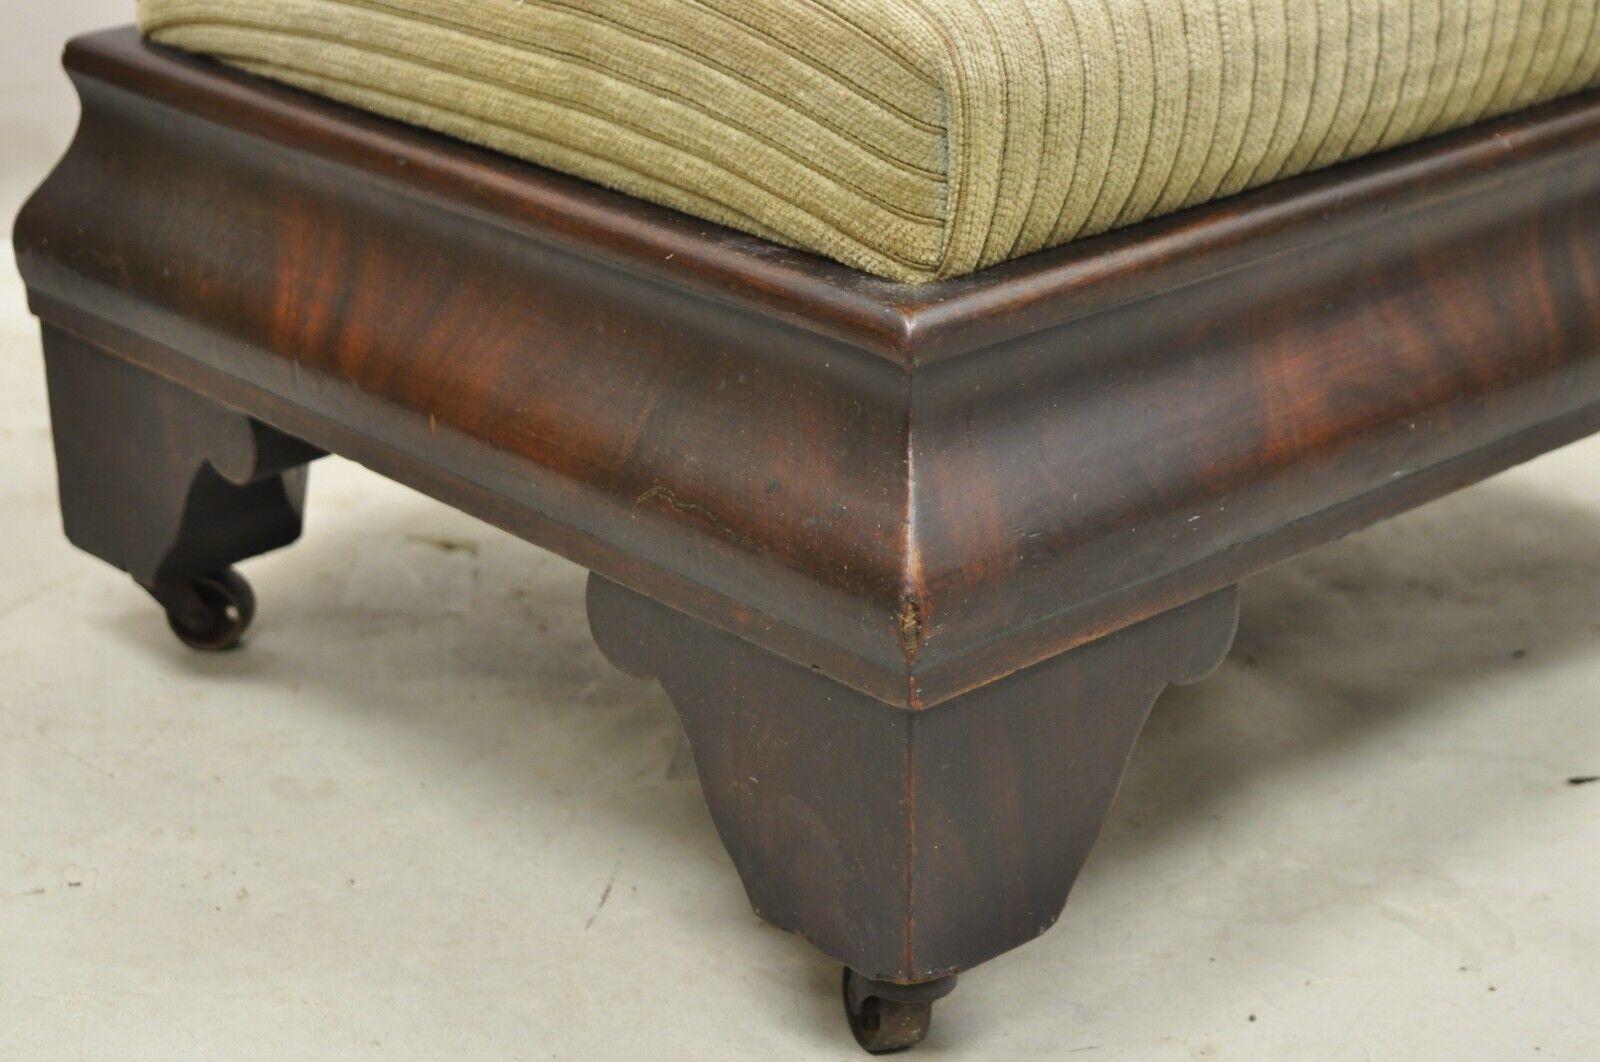 Antique American Empire Flame Mahogany Upholstered Ottoman Footstool on Wheels 6